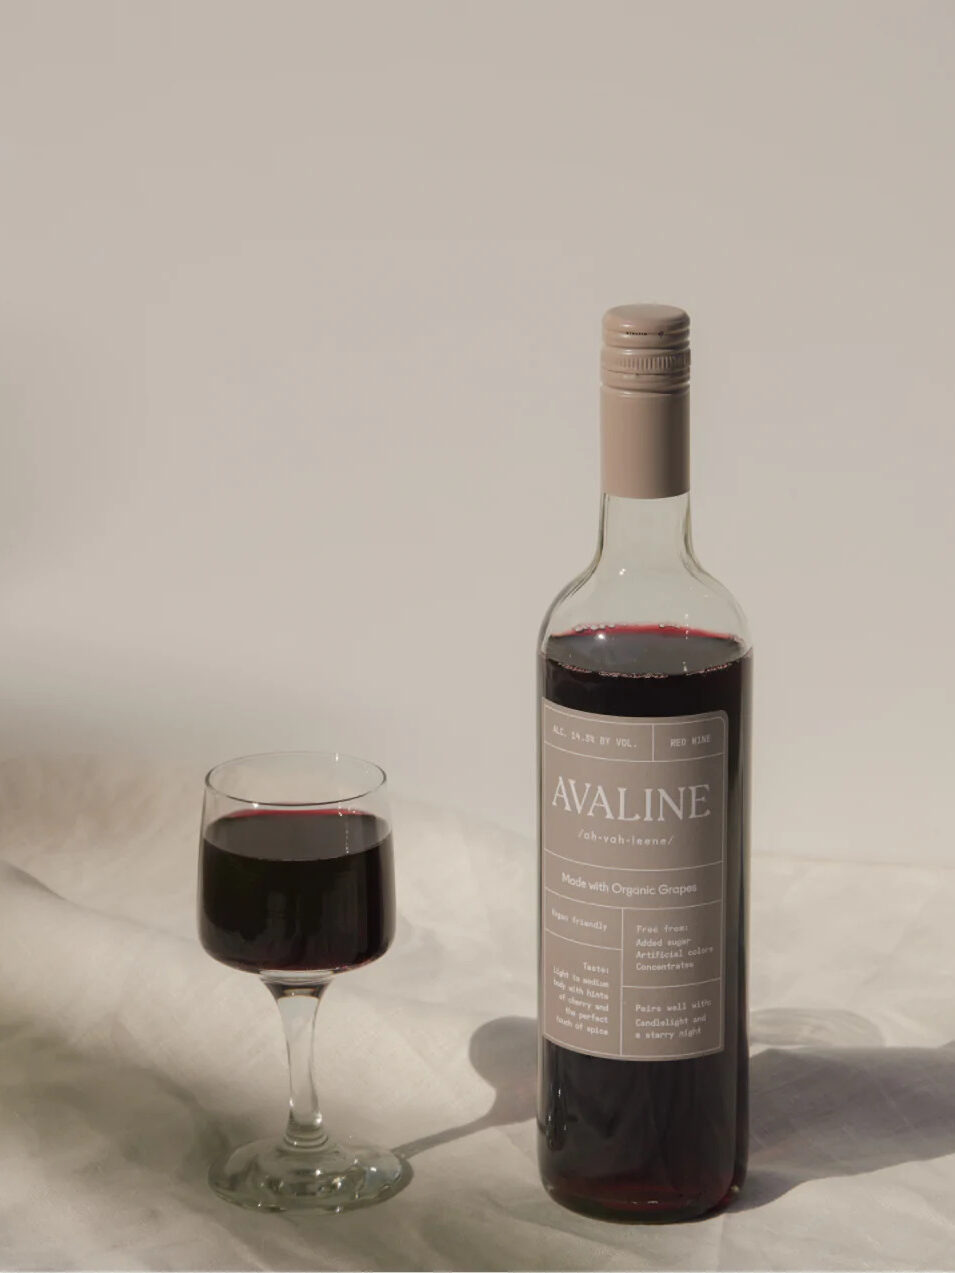 A bottle and glass of Avaline red wine.